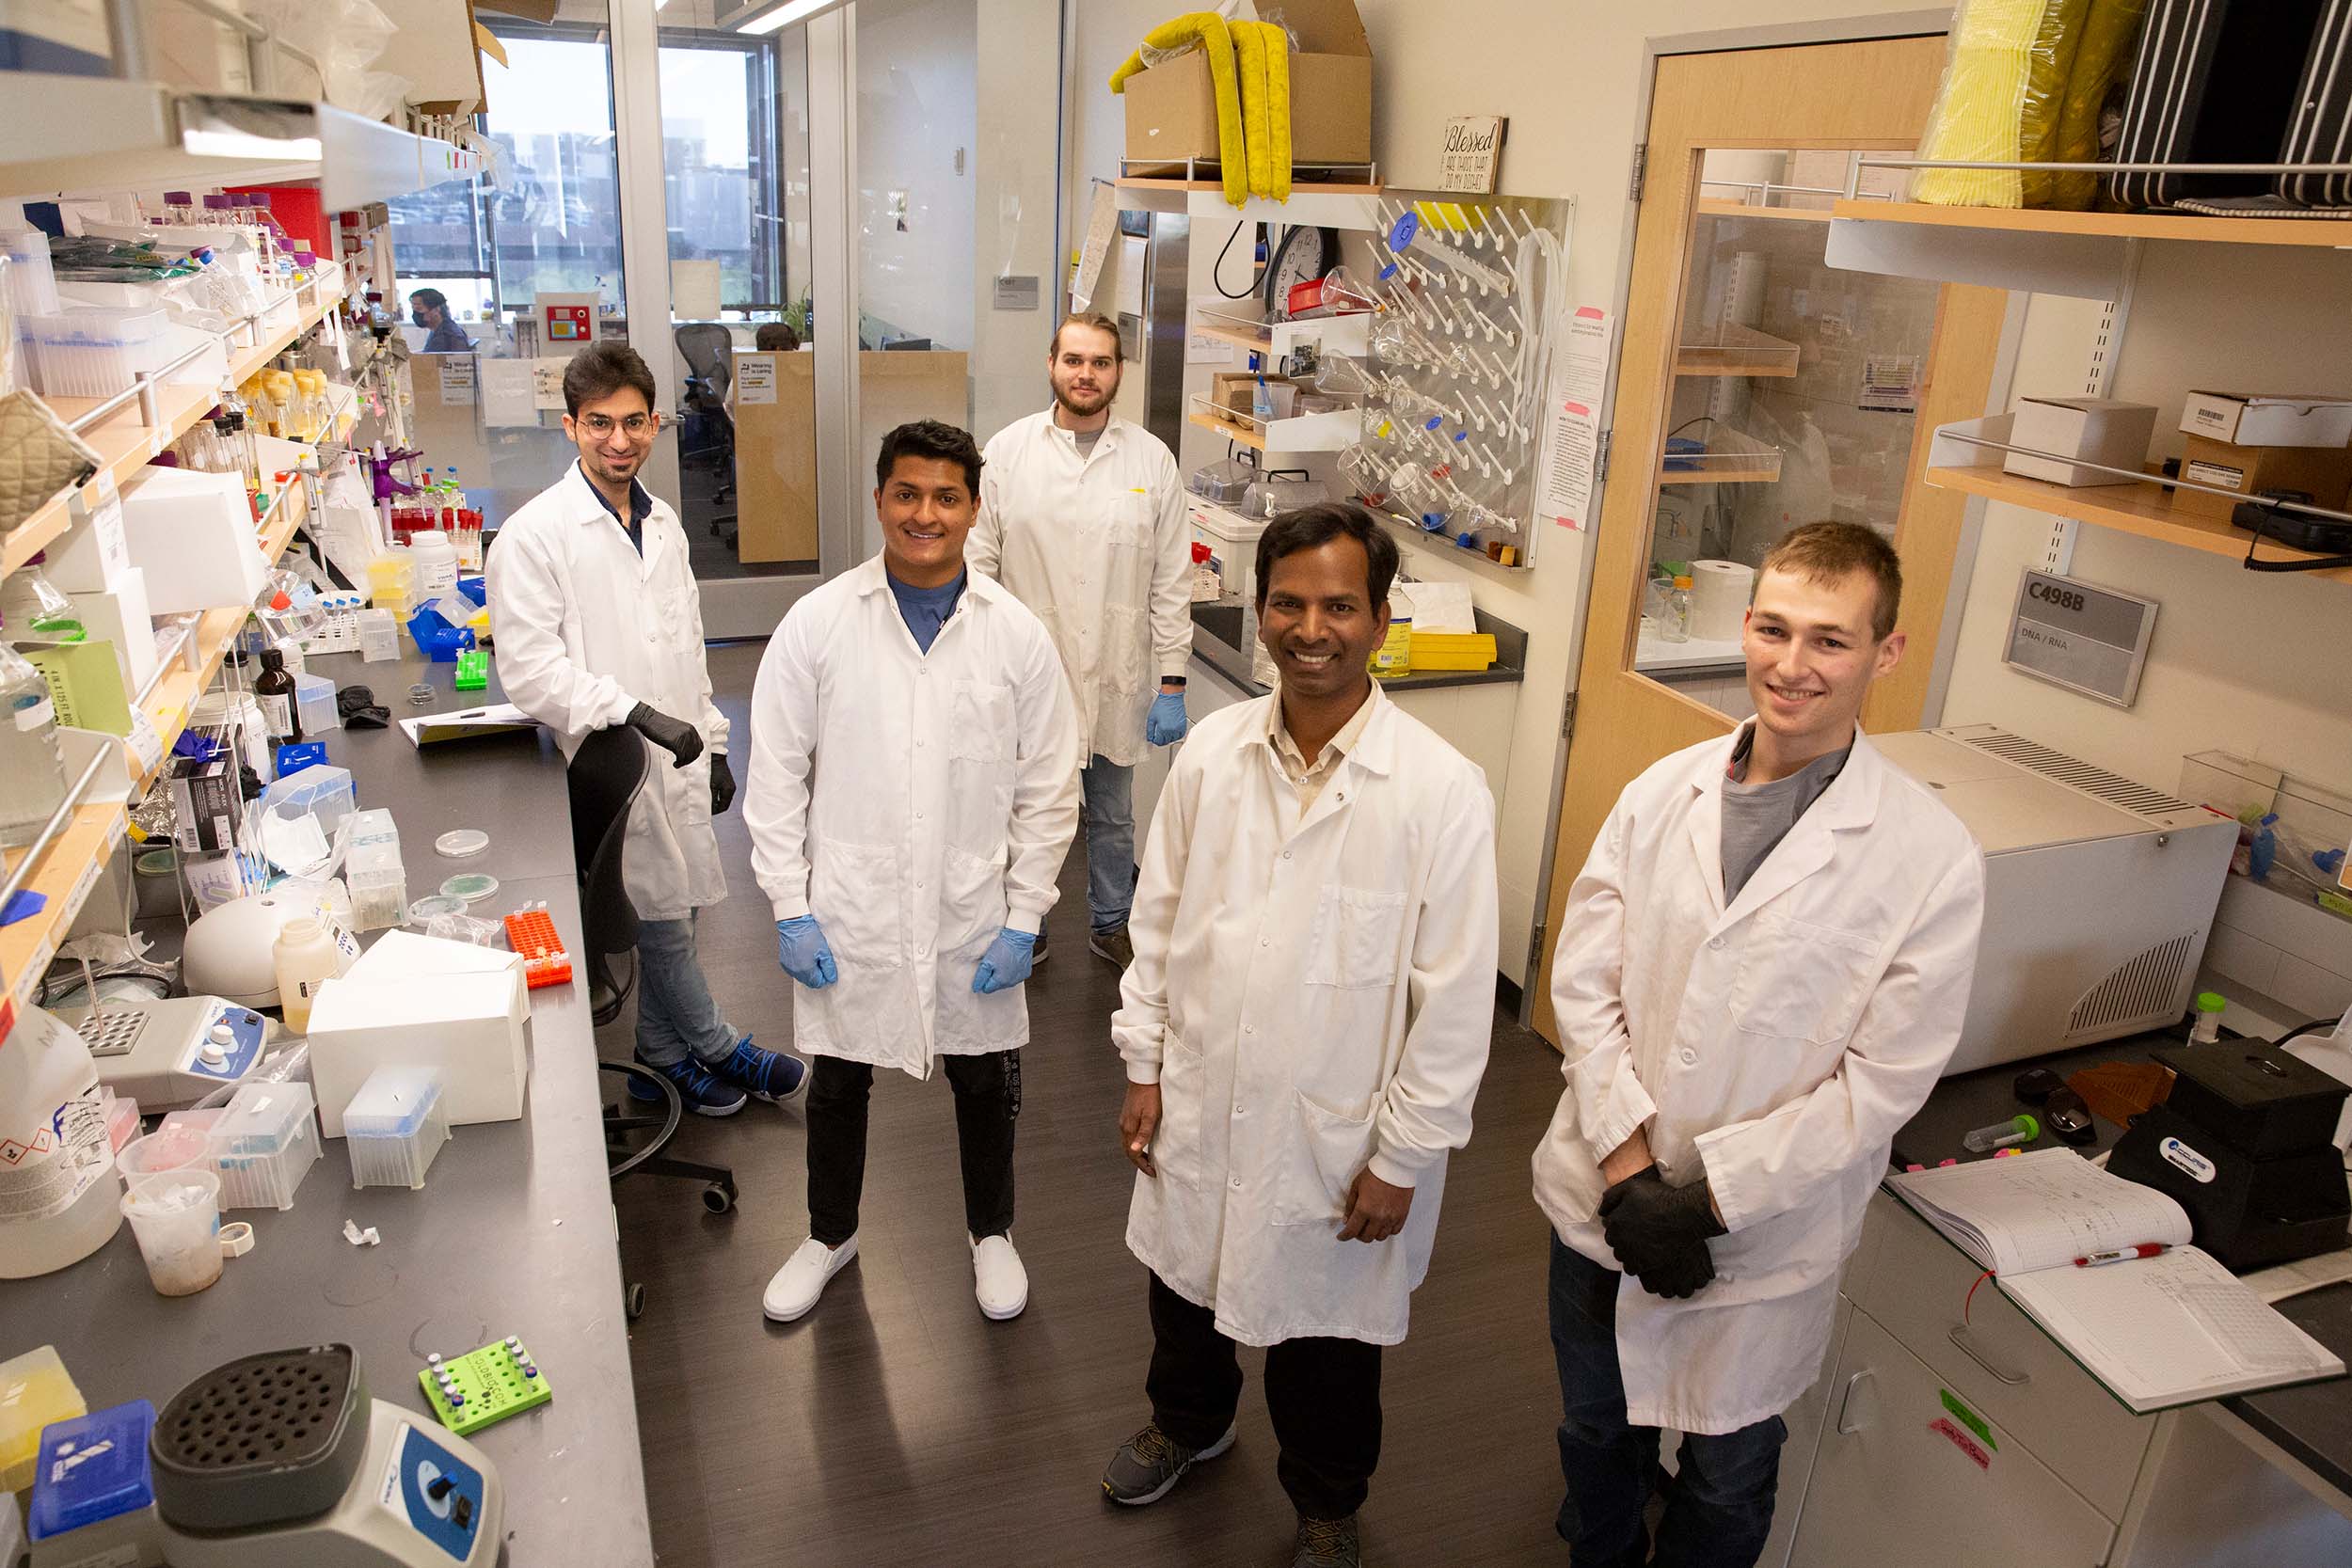 Azul Varman and four other researchers pose for a photo in Varman's lab